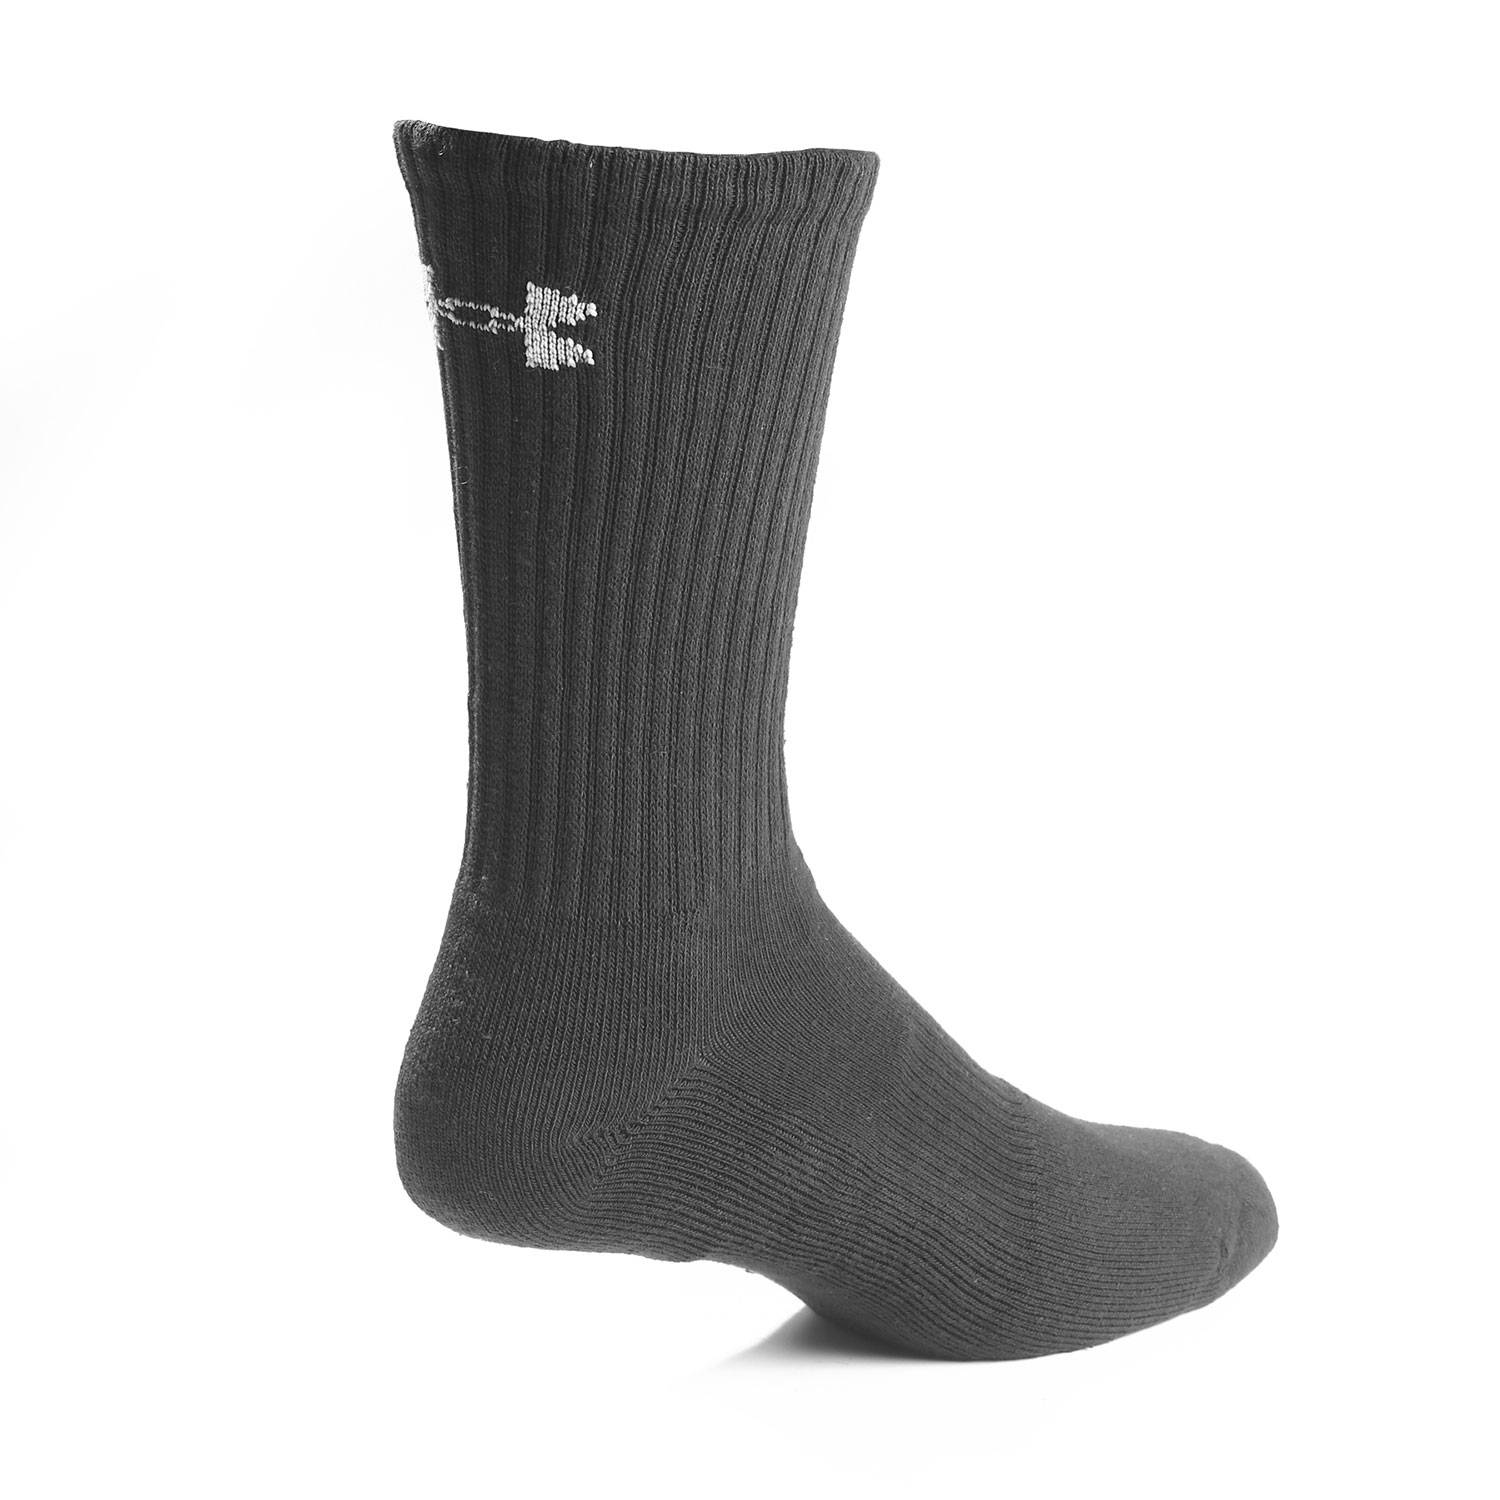 Under Armour Charged Cotton 2.0 Crew 